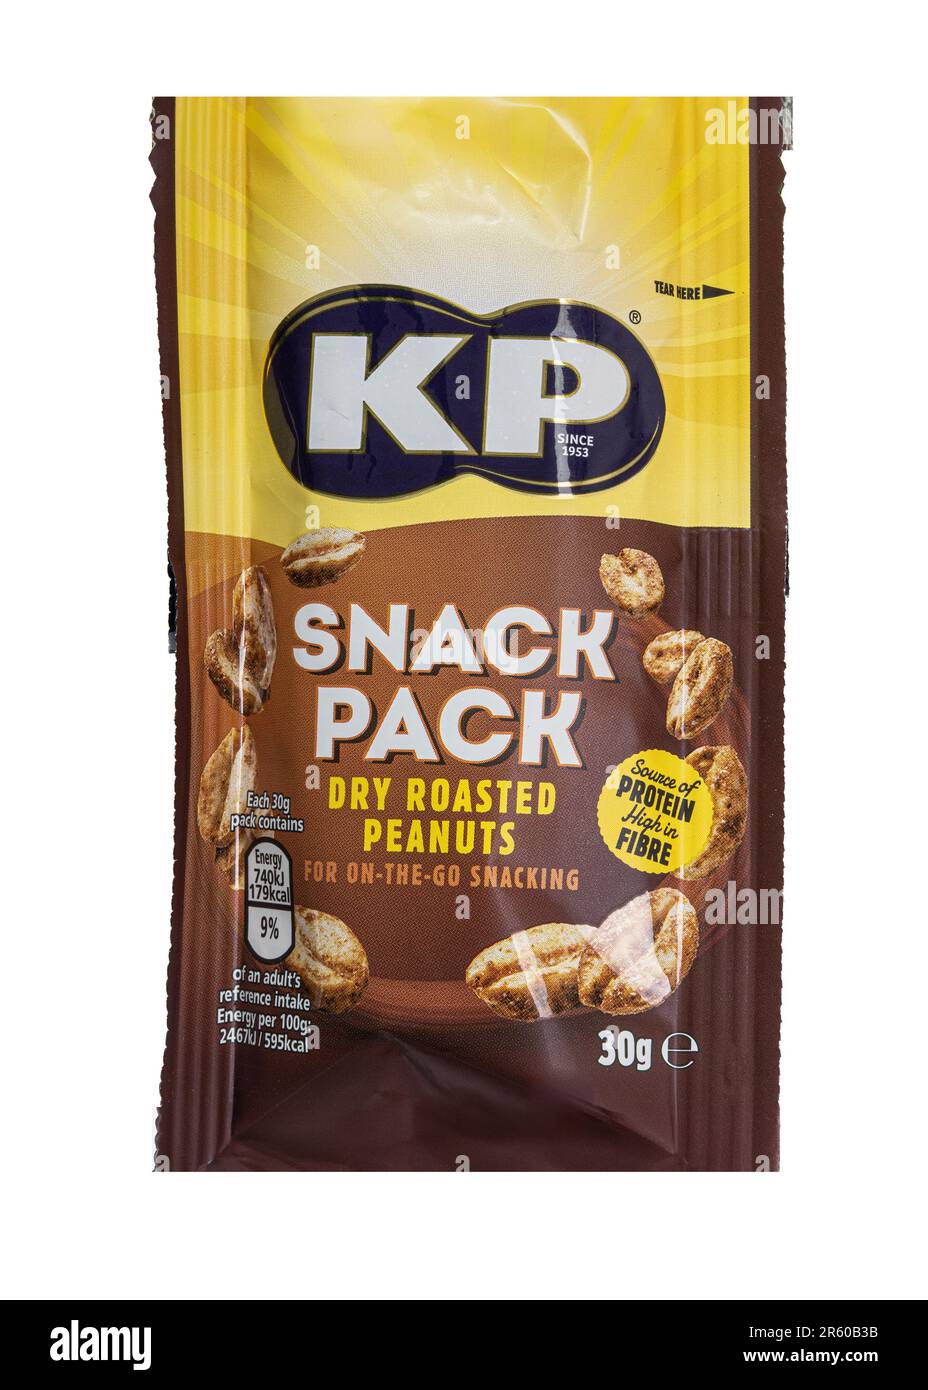 SWINDON, UK - JUNE 6, 2023: Snack Pack of KP Dry Roasted Peanuts on a white background Stock Photo